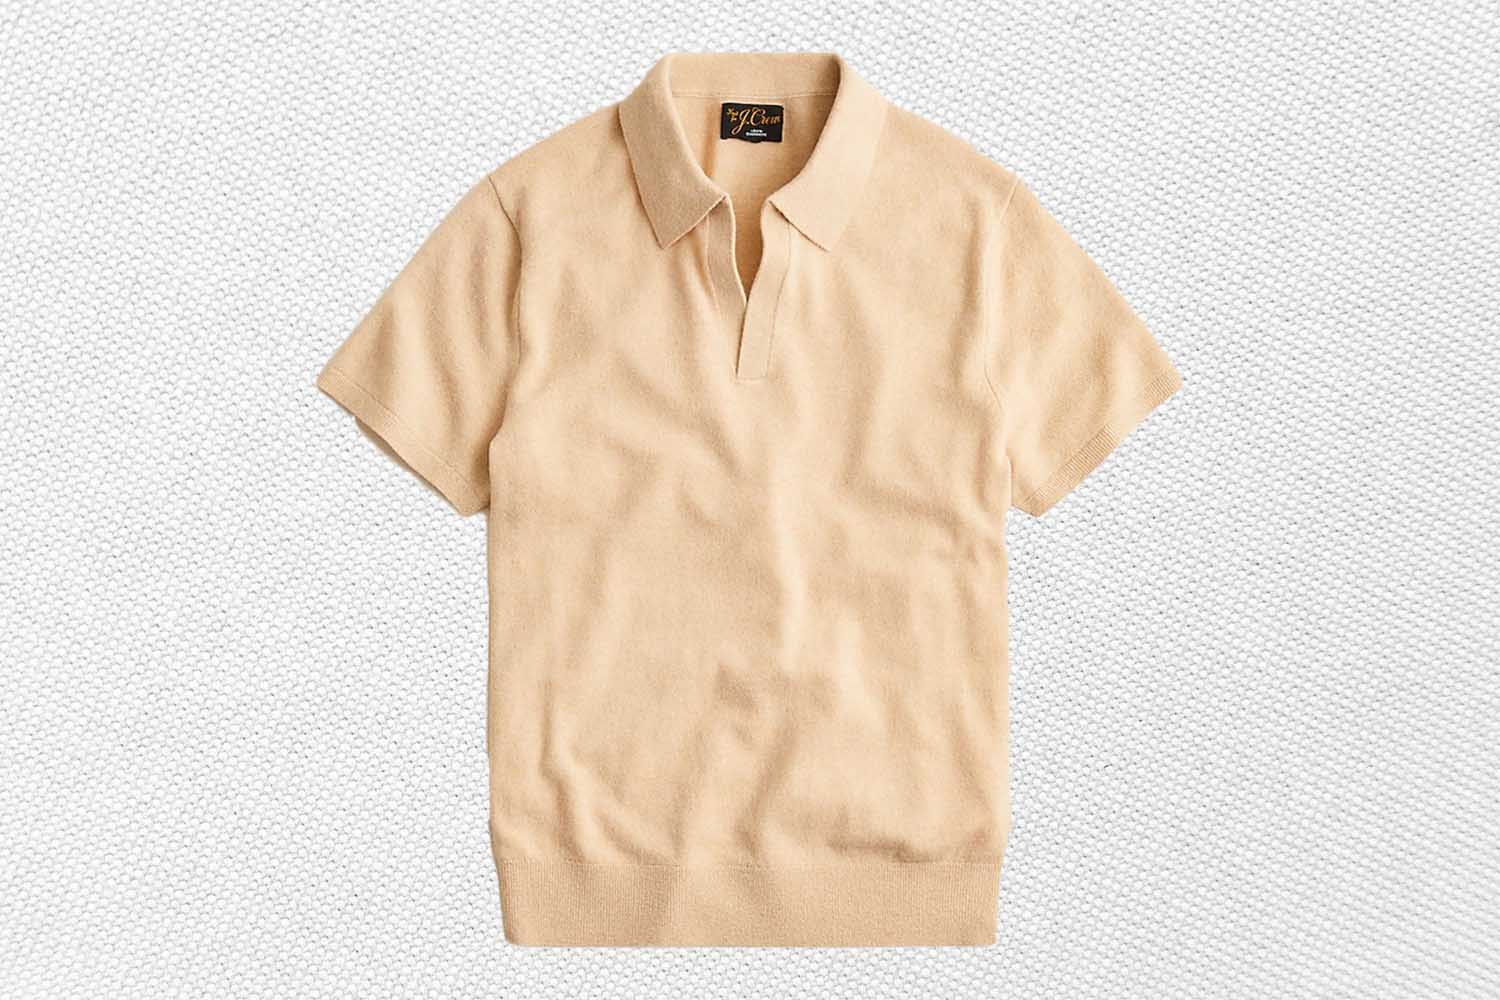 a cream cashmere polo from J.Crew on a textured white background